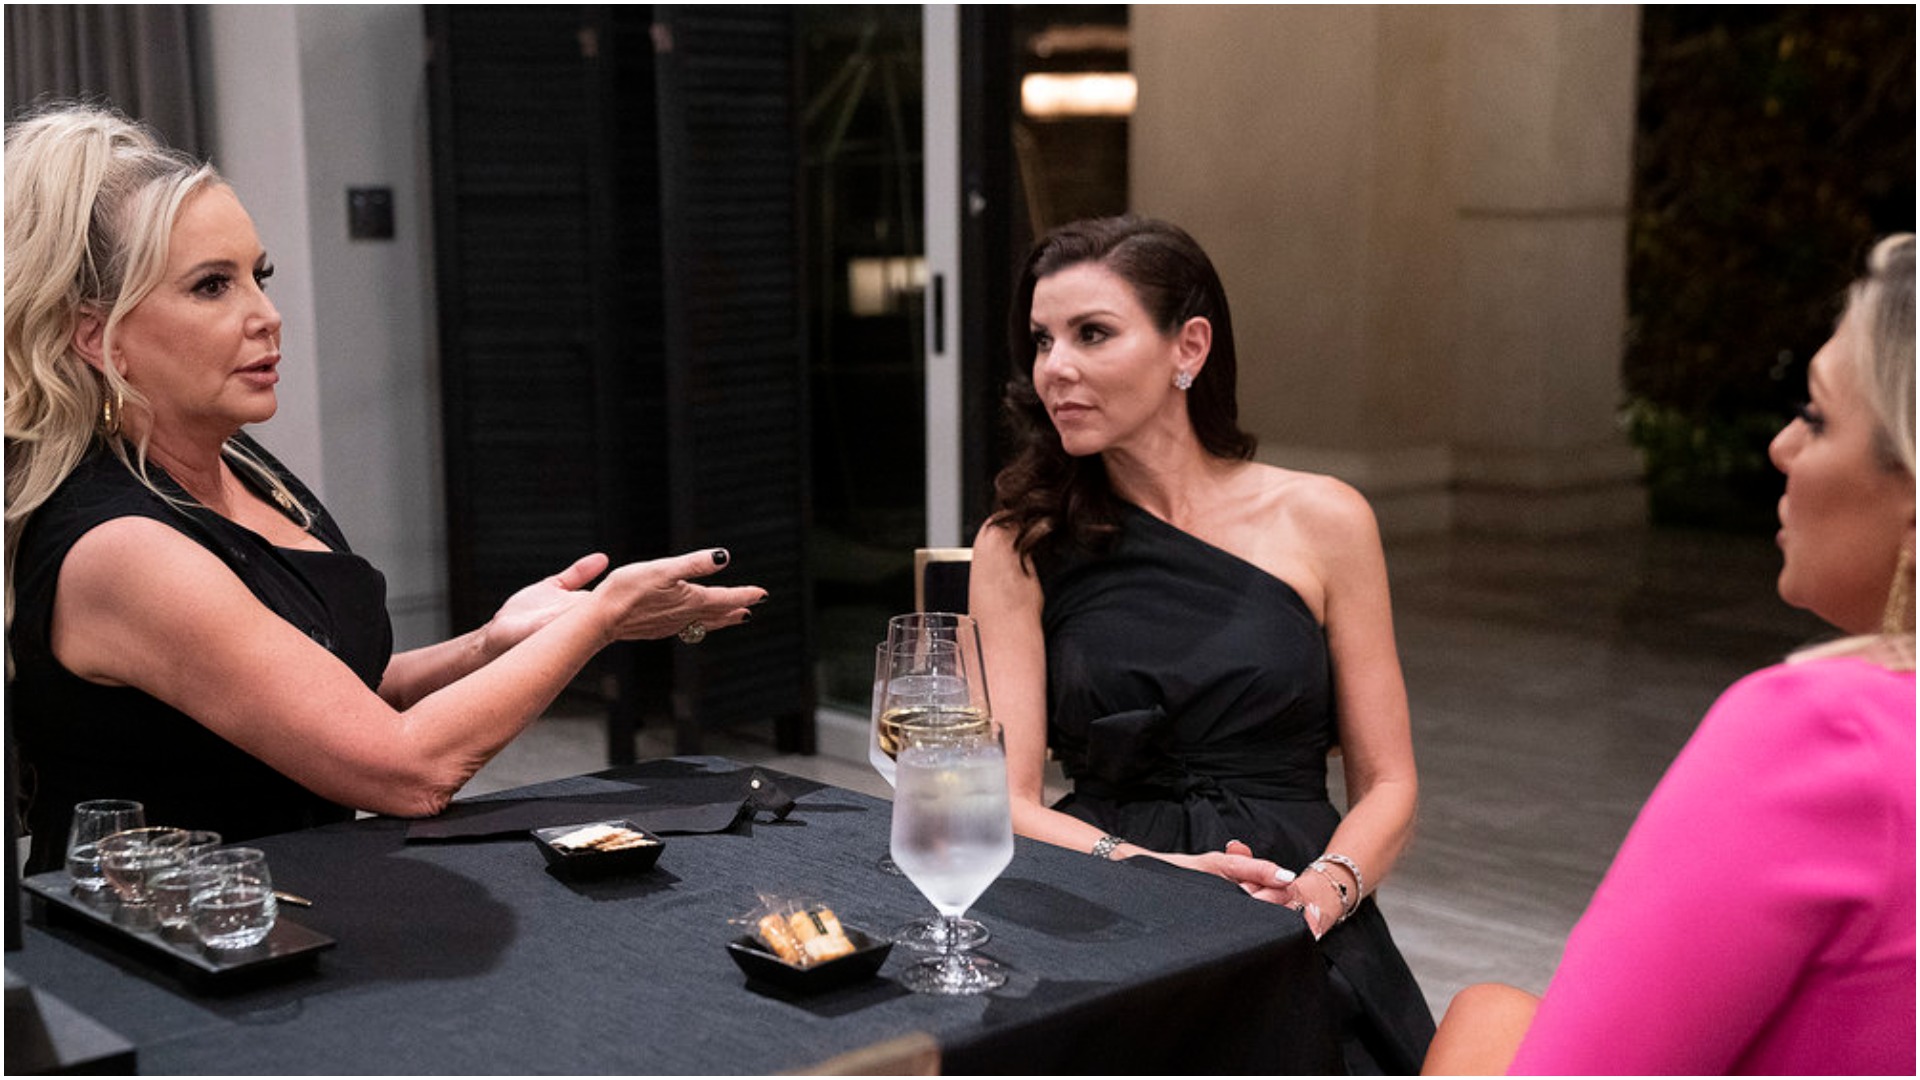 Shannon Storms Beador, Heather Dubrow, Gina Kirschenheiter from RHOC at Heather Dubrow's party